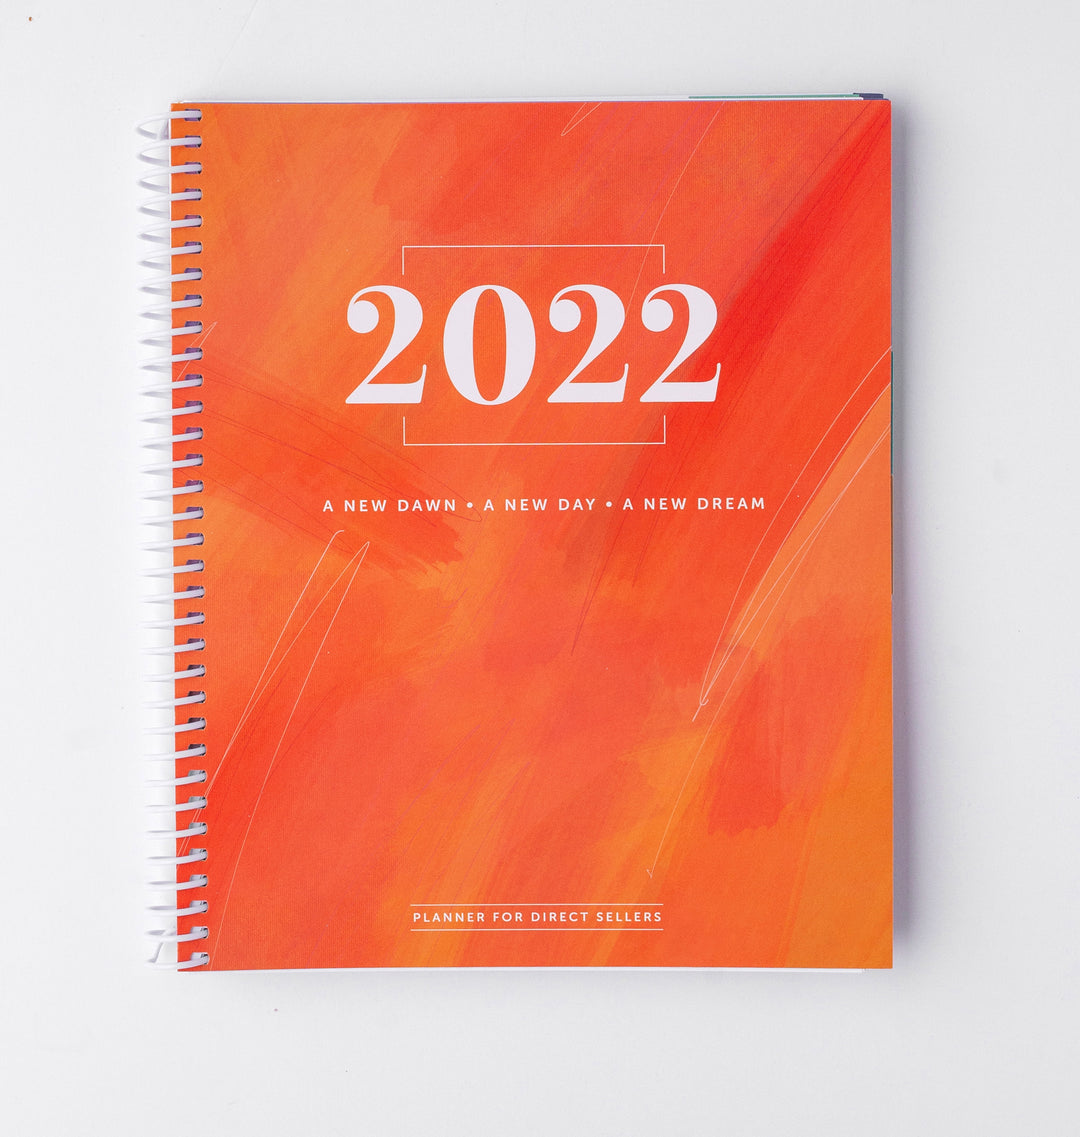 Bulk 2022 Planners 10 or More $199.50 (19.50 each) NEED PRICING